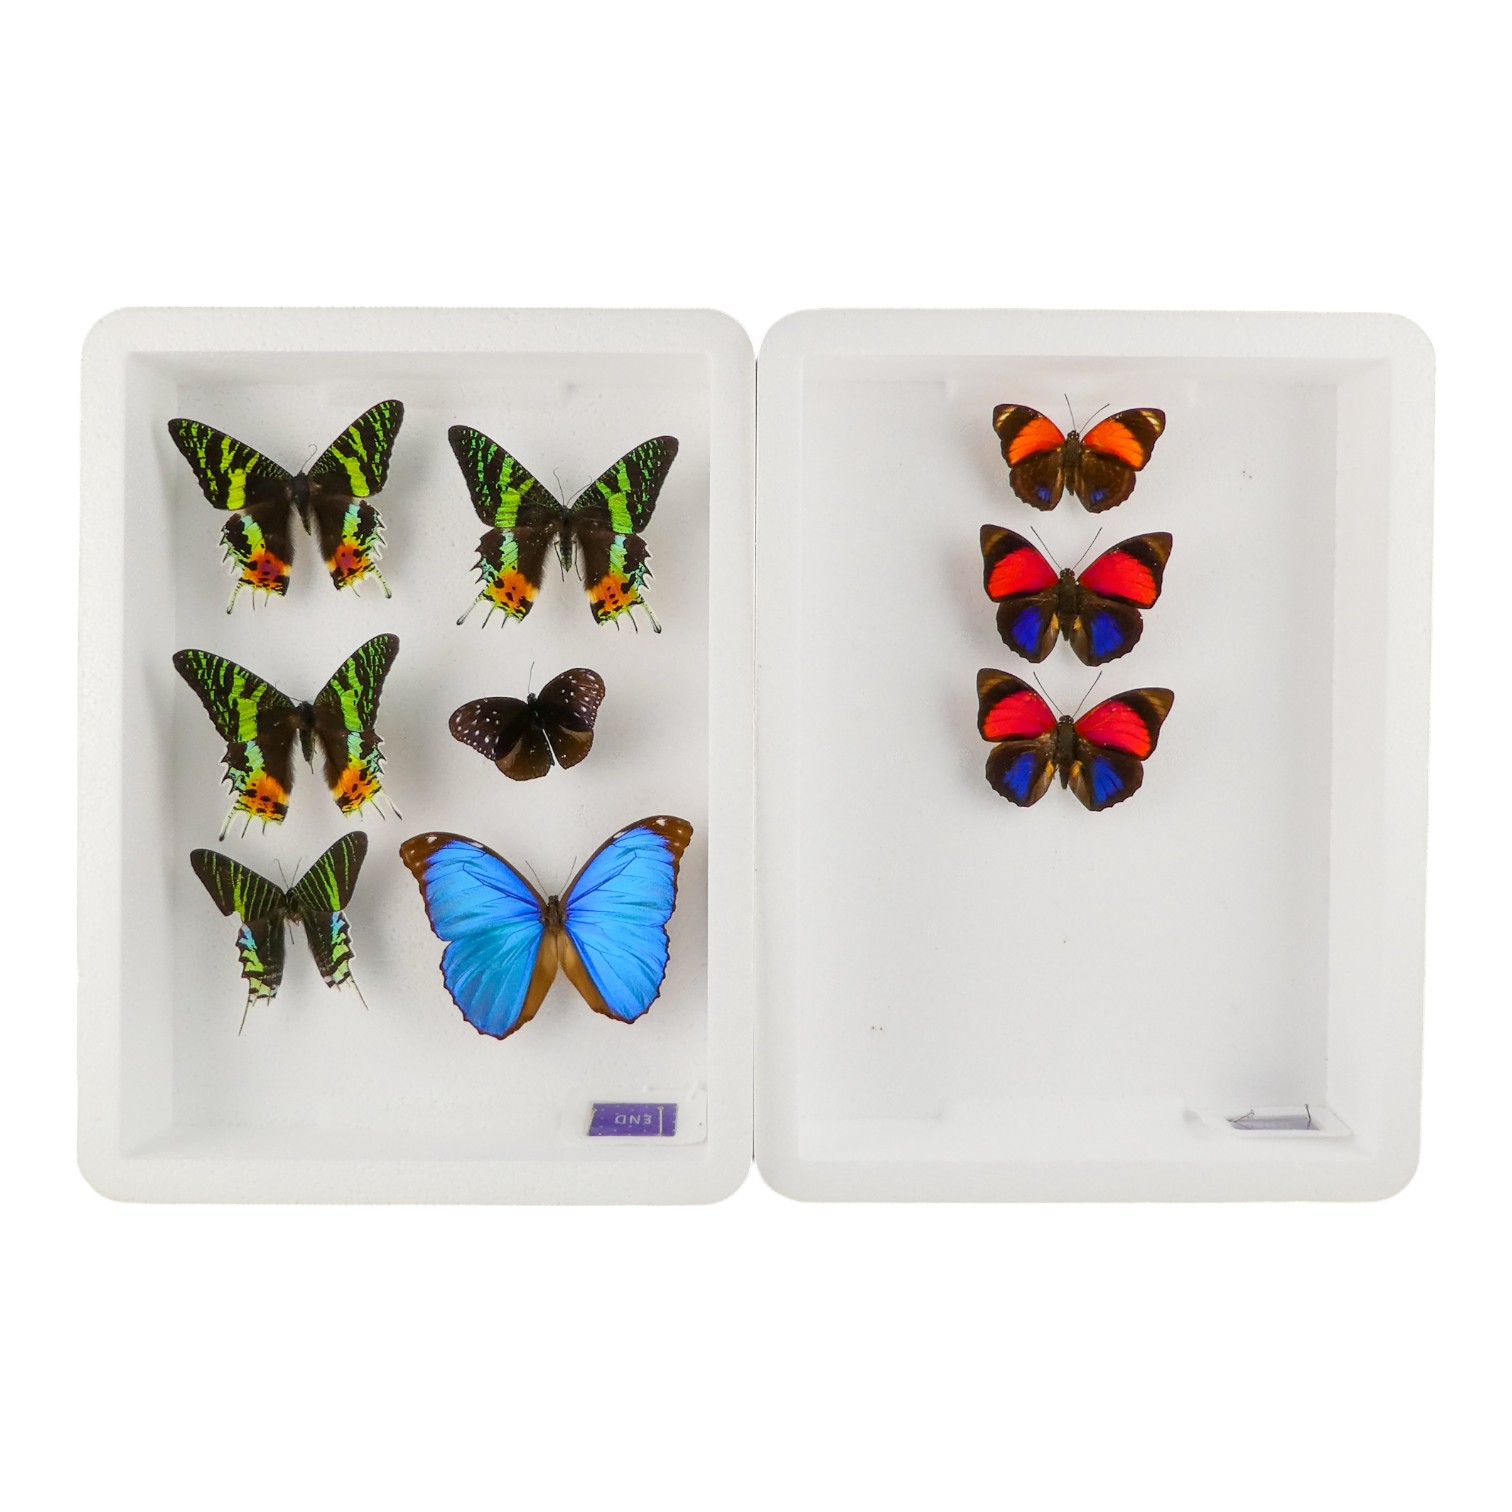 Two cases of butterflies in rows - including Madagascan Sunset Moth, Agrias Claudina Pink and Morpho